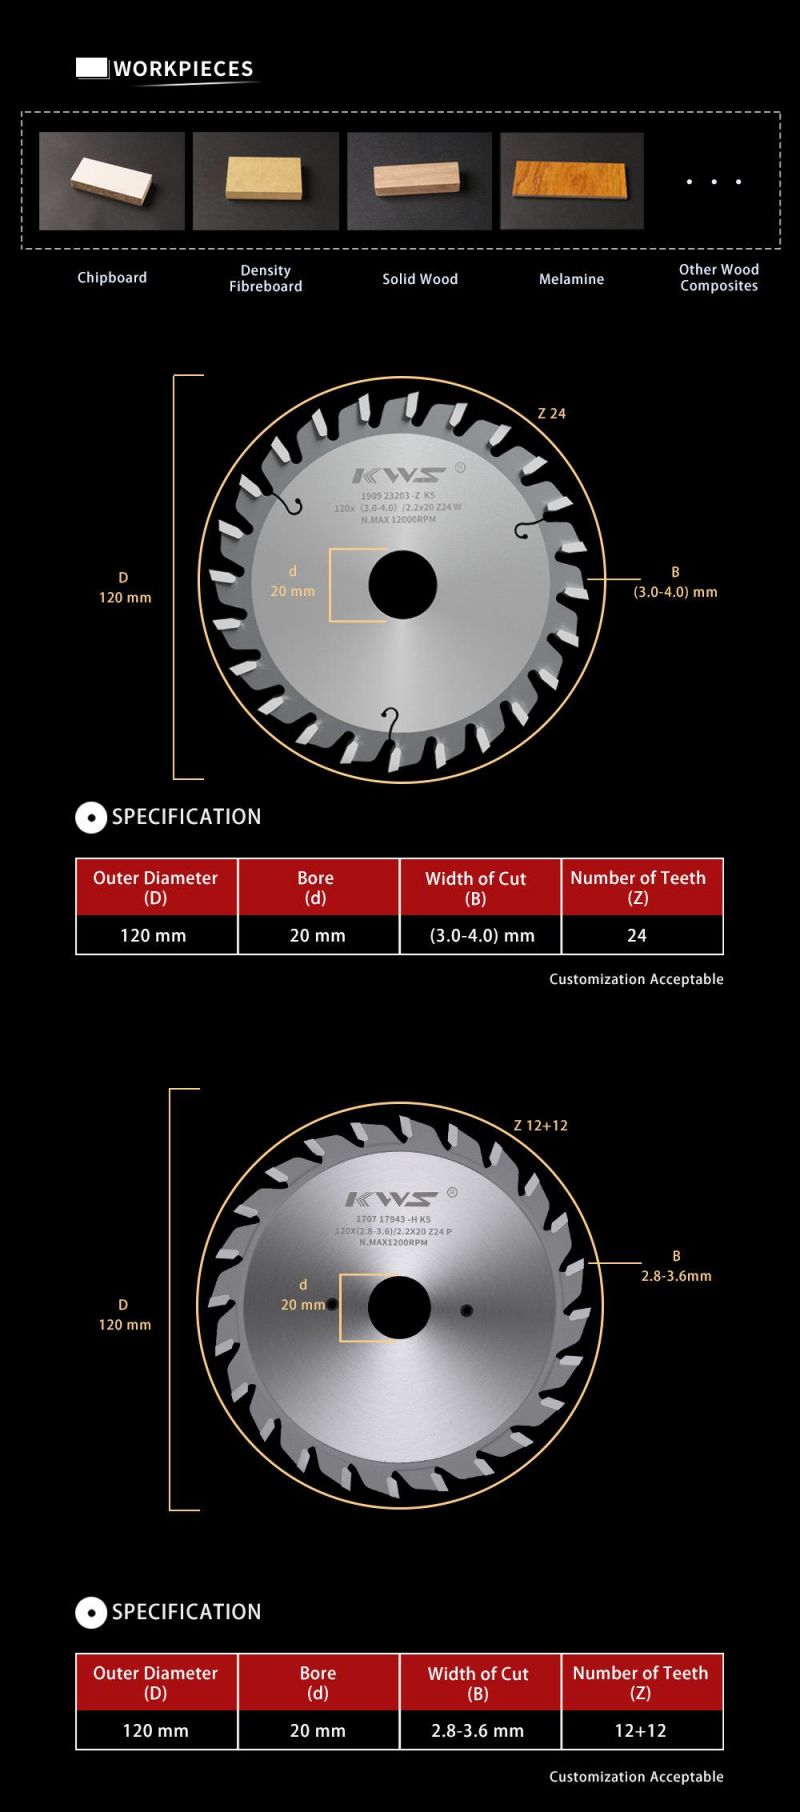 Kws Conical Scoring Saw Blade for Horizontal Beam Saw 120 mm 24 Teeth Tct Carbide Tipped Atb Tooth Saw Blade Scm Machine Tools